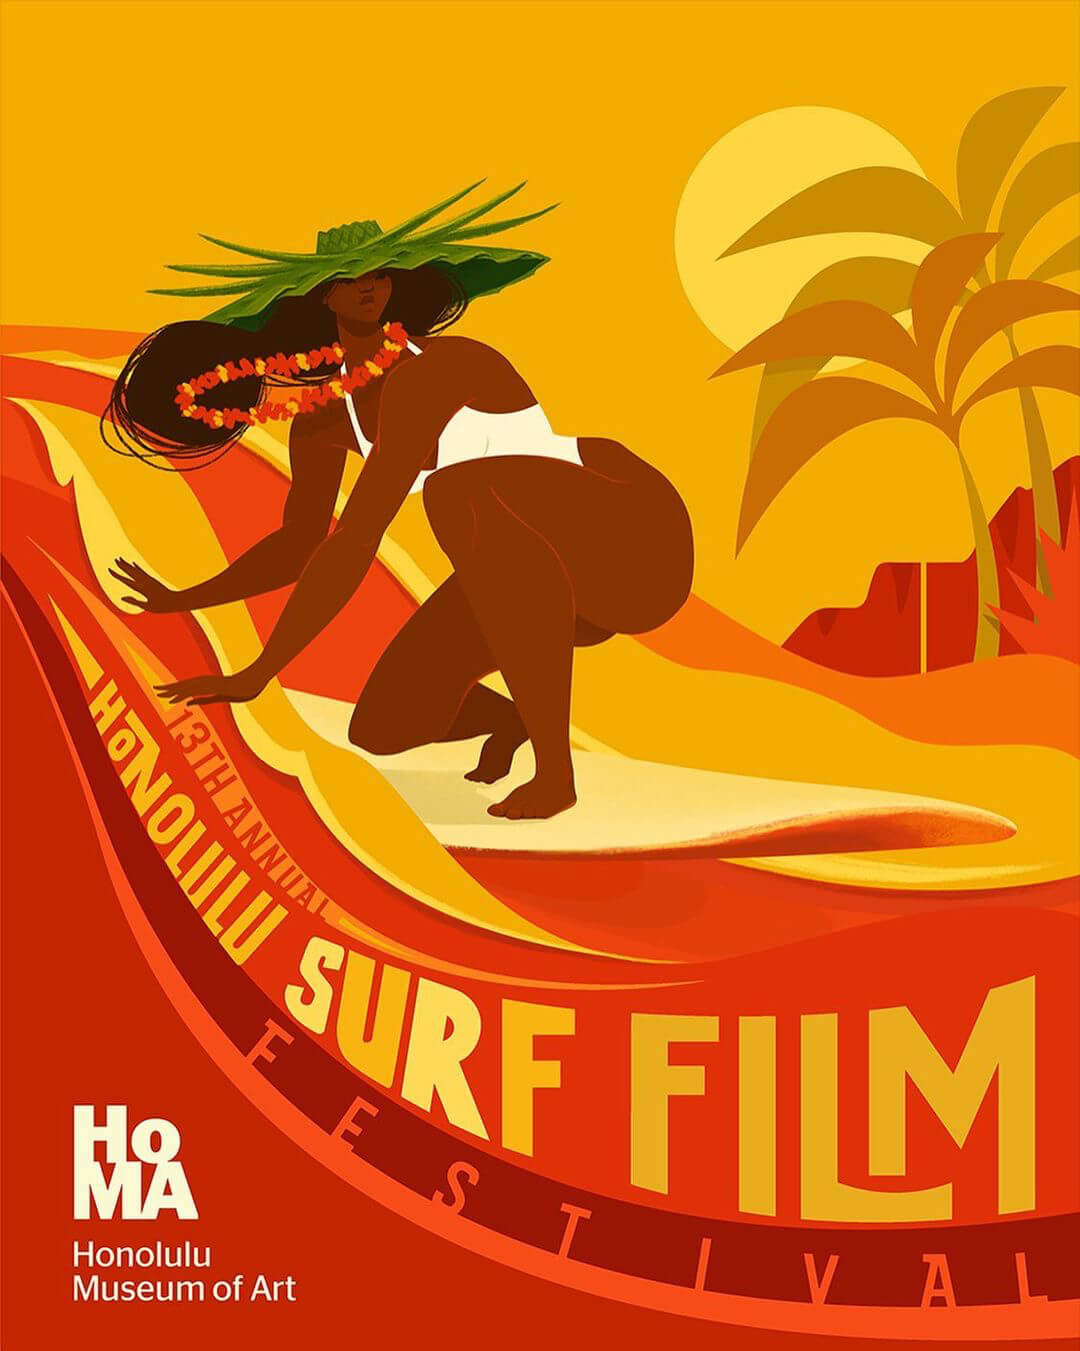 The Honolulu Museum of Arts 13th Annual Surf Film Festival